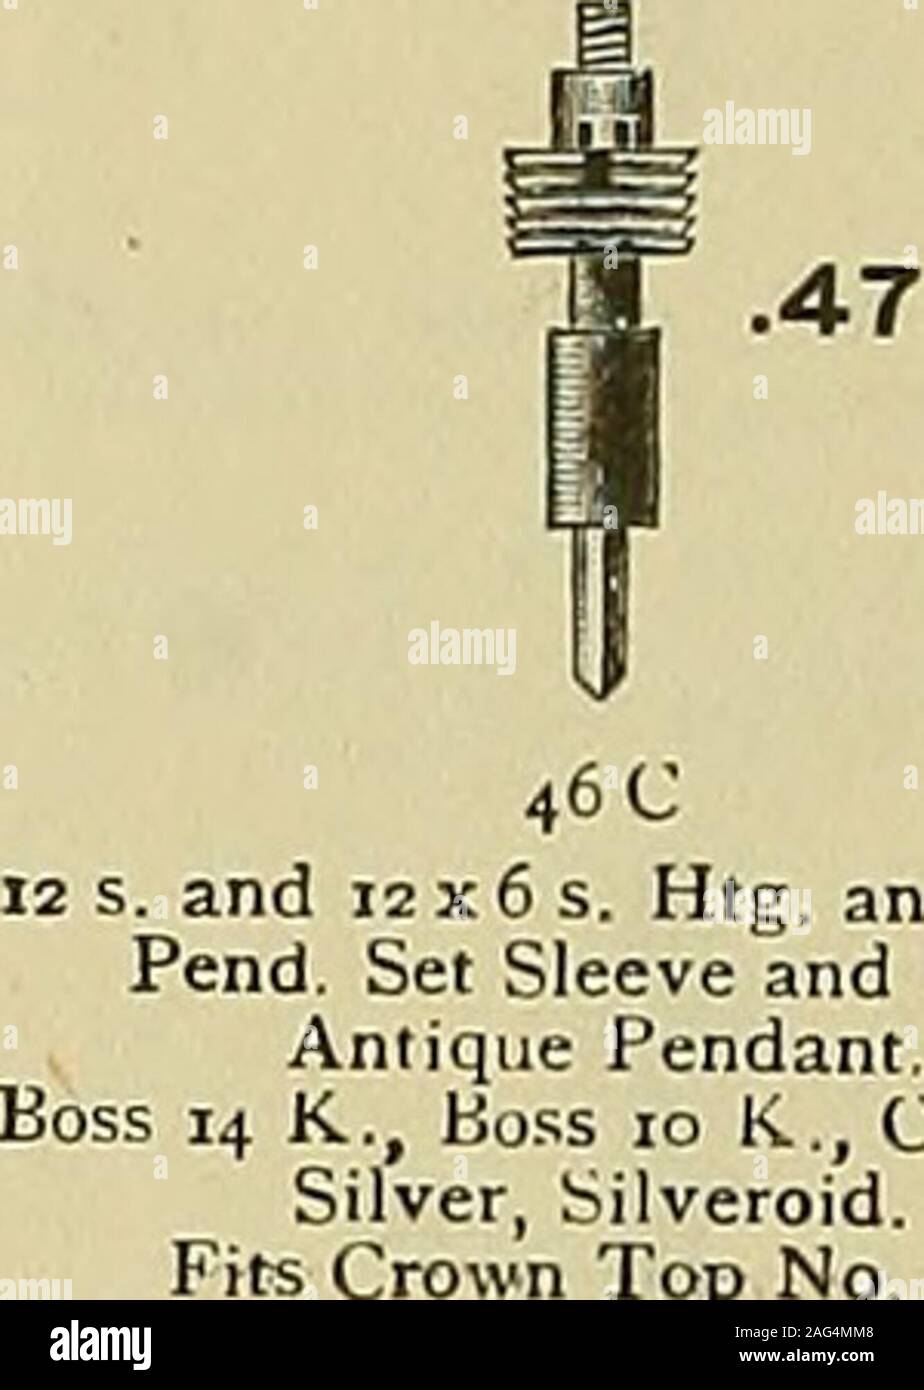 . 20th century catalogue of supplies for watchmakers, jewelers and kindred trades. Complete S3 00 per doz. Sle : bar separately 1.50 12x6 s. Htg. and O F., Pend. Set Sleeve and Bar. Round Pendant, non-pull-out bow. Boss 14 K., Boss 10 K., Cyclone, Silver. Fits Crown Top No. 6. Complete ^3 00 per doz, Sleeveor bar separately, 1.50 ?? 43 C I2x6s, Htg, and O, F., Pend. Set Sleeve and Bar, Round Pendant, Boss 14 K,, Boss 10 K,. Cyclone, Silver, Silveroid Fits Crown Top No, 6, Complete, $3,00 per doz. Sleeve or bar separately, :,50 The Twentieth Century Catalogue of Supplies KEYSTONE WATCH-CASE MAT Stock Photo